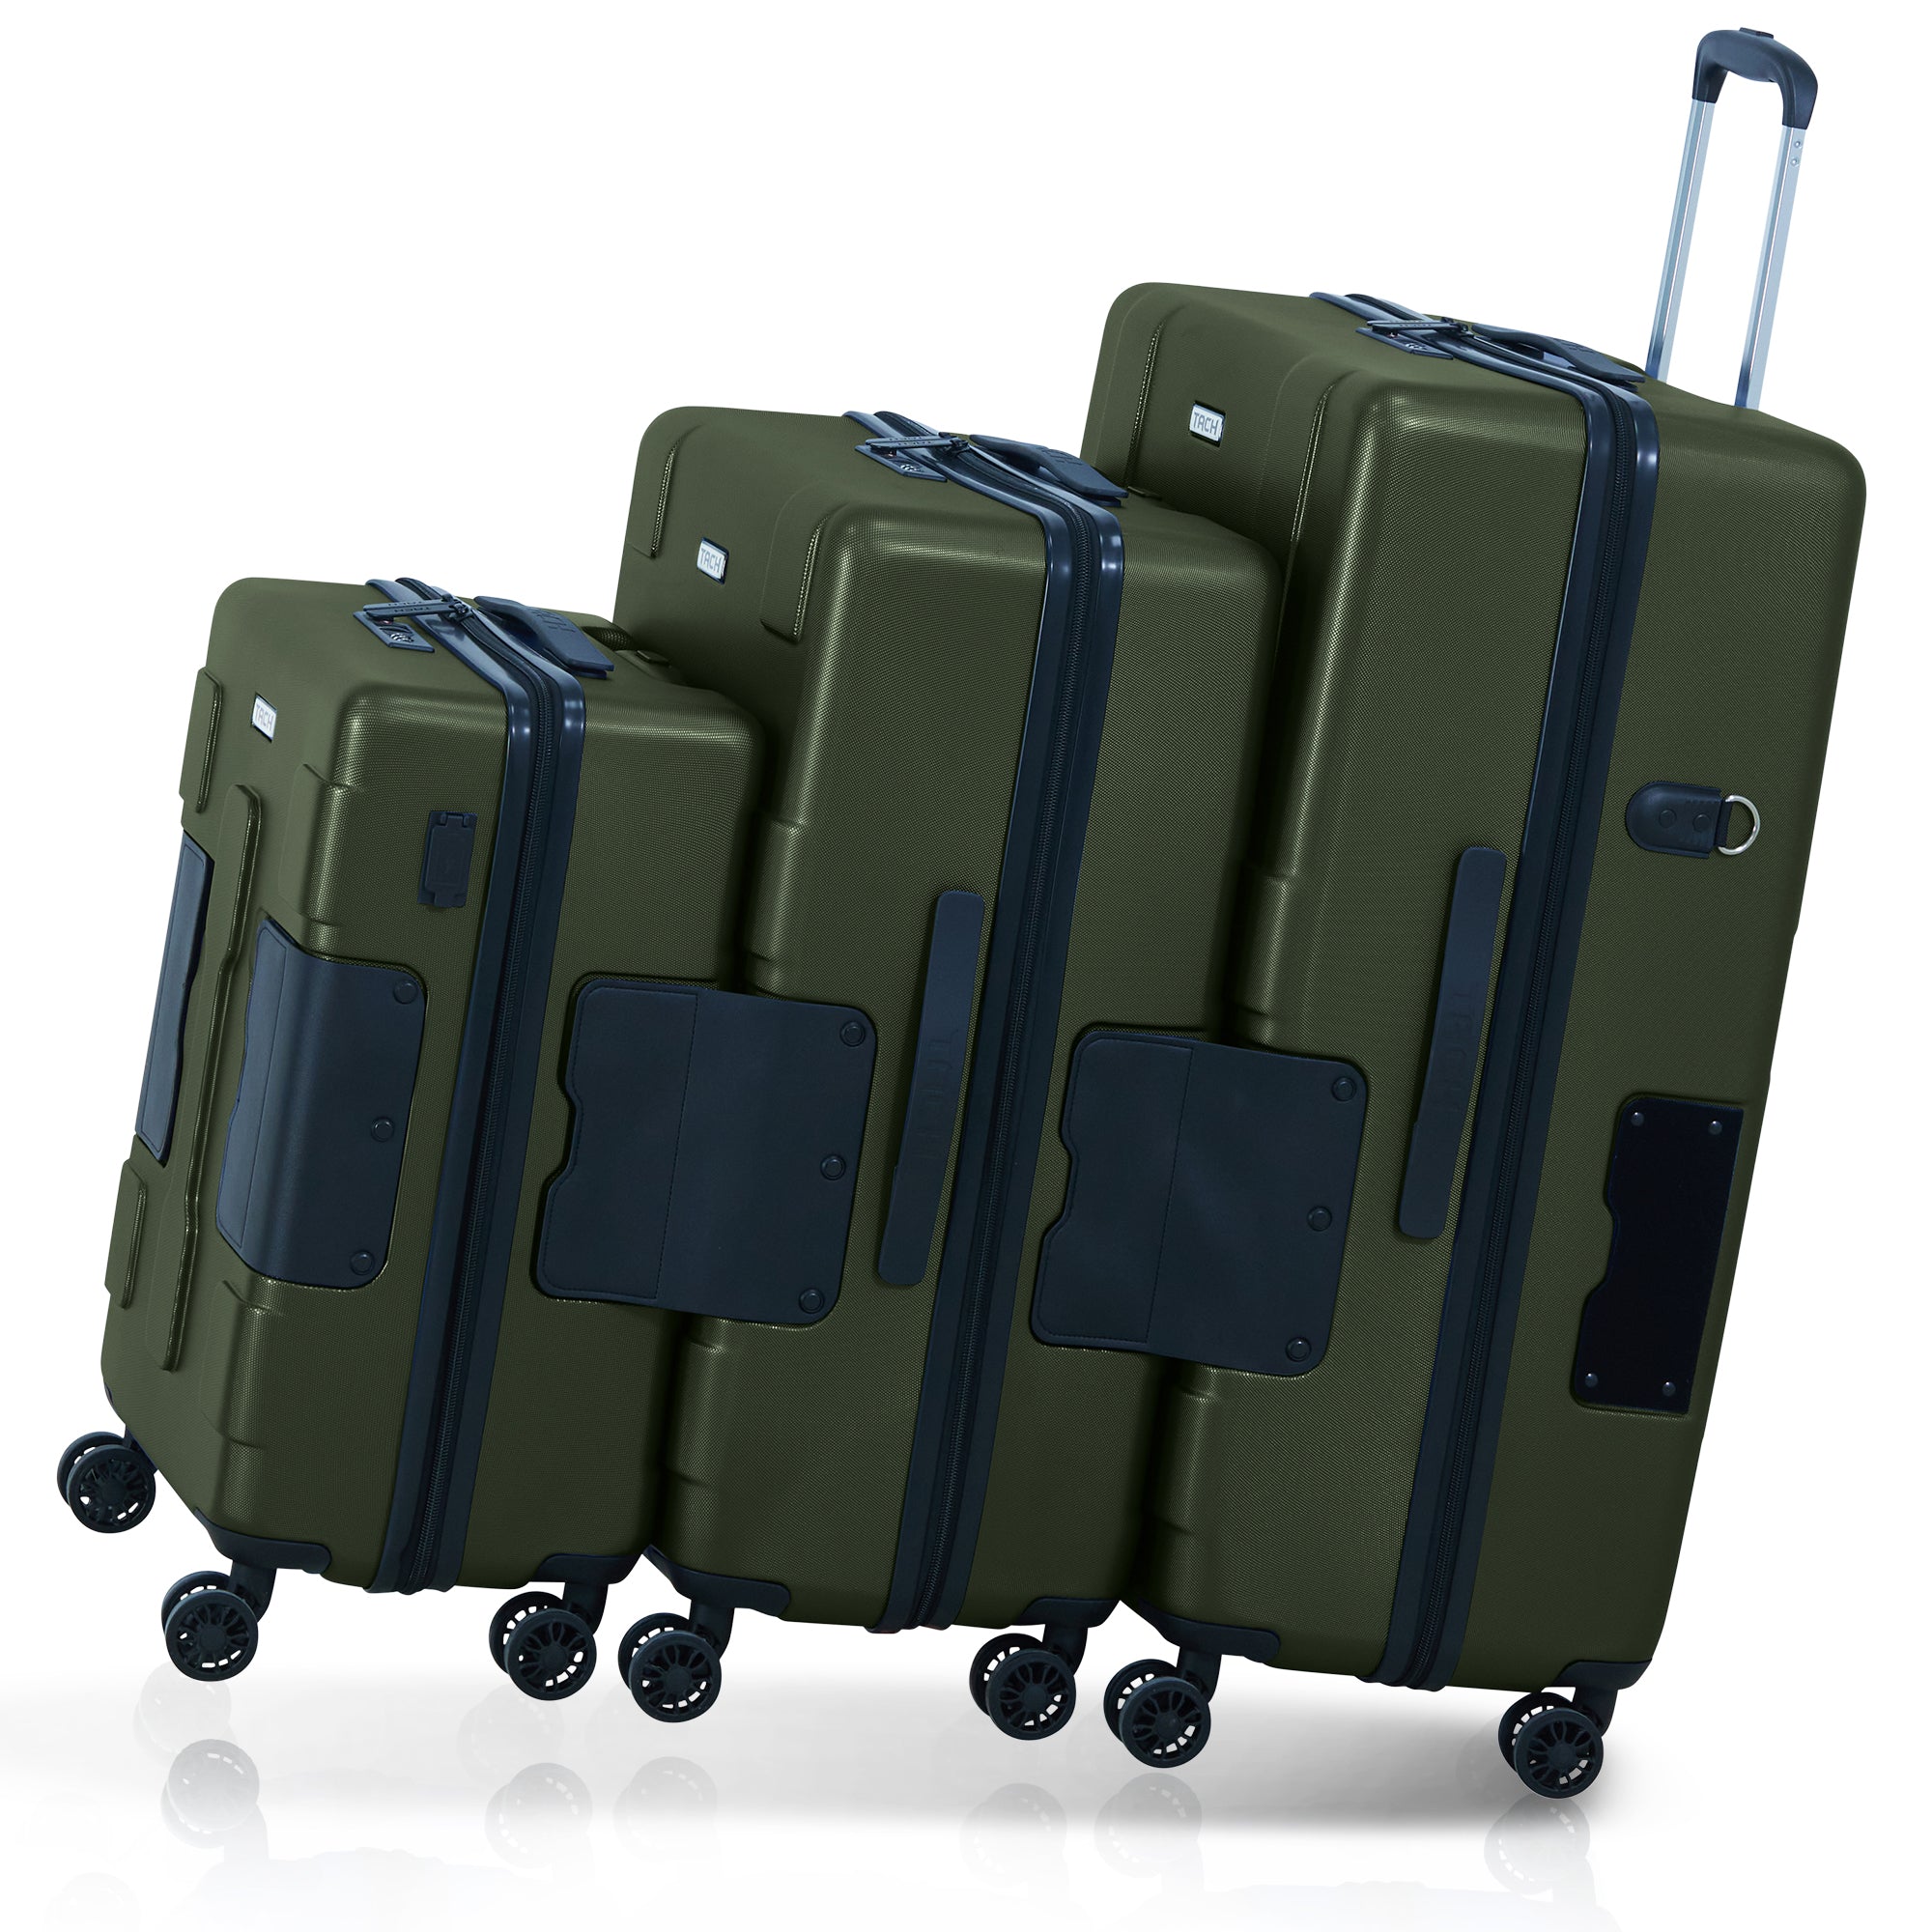 TACH V3 Connectable Luggage Bag Set of 3